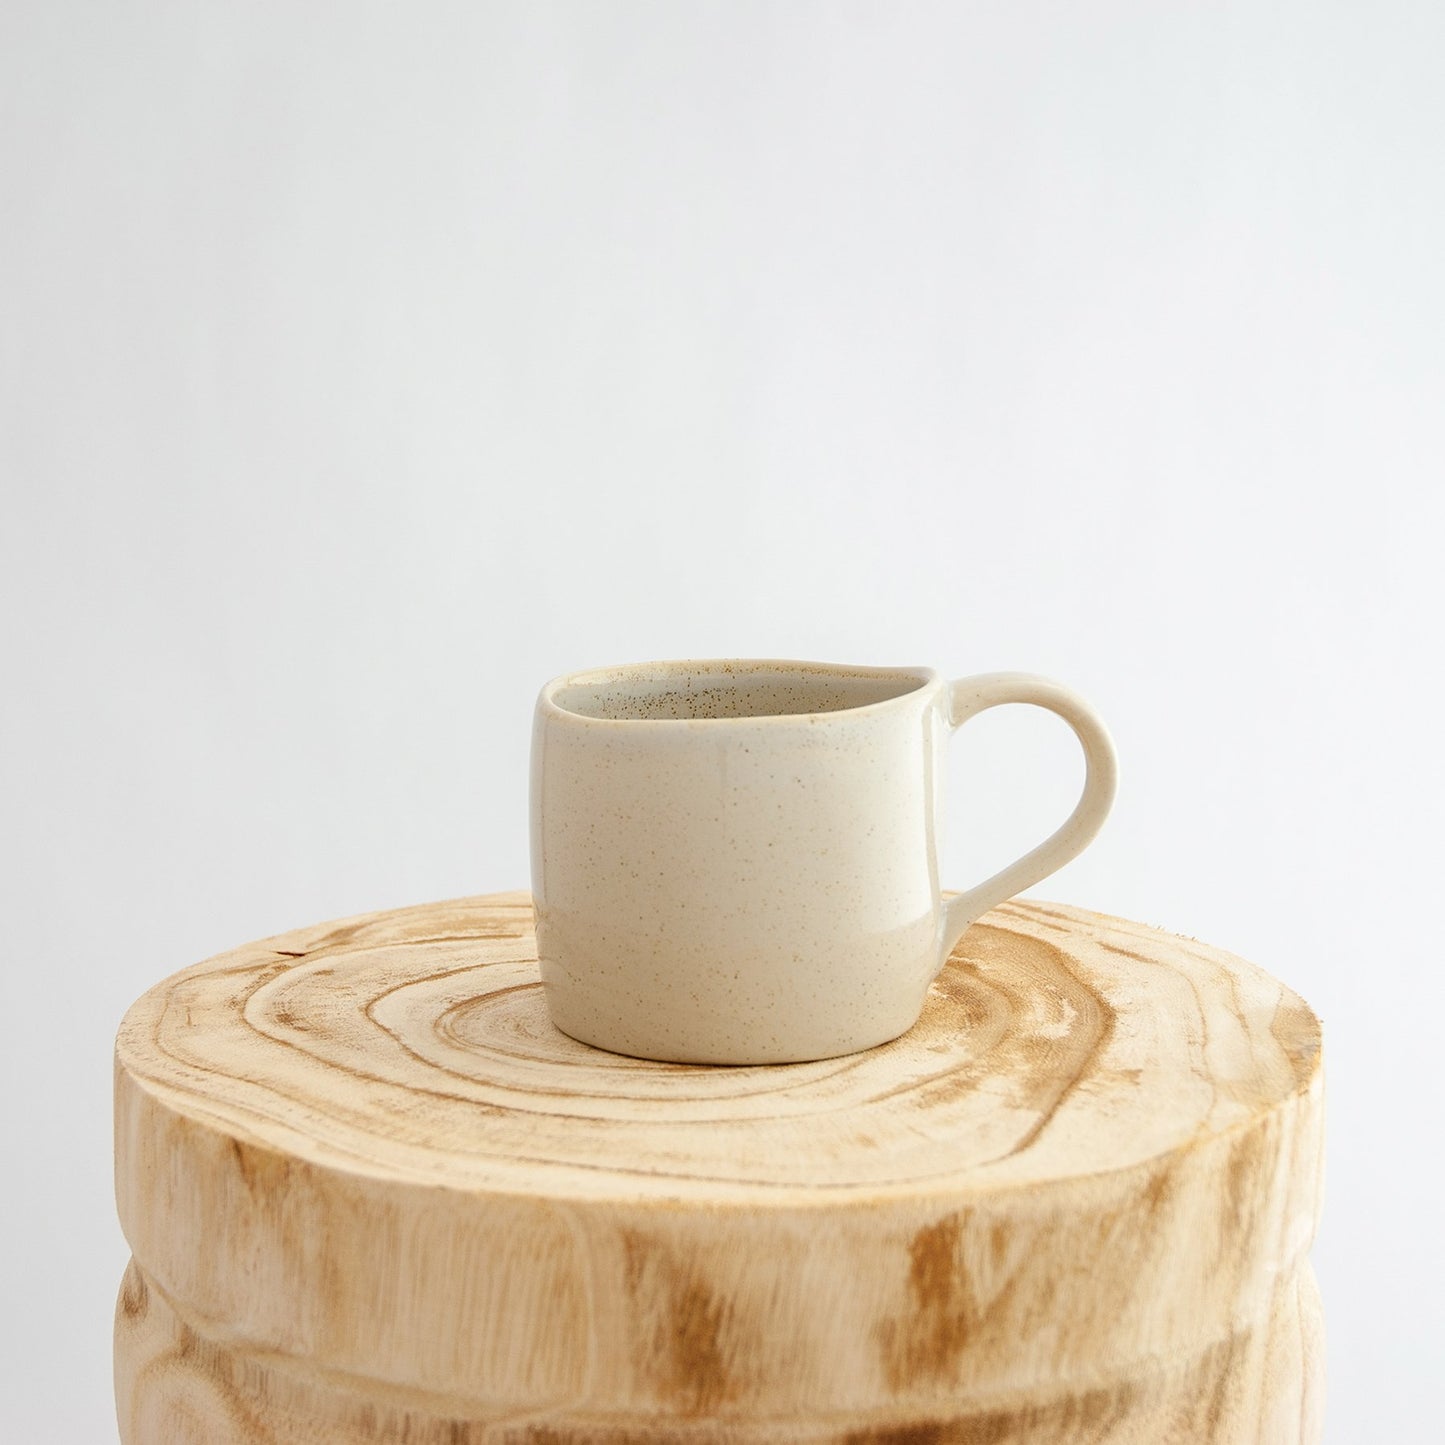 Robert Gordon oatmeal cream organic mug coffee cup sitting on a natural wooden round side table